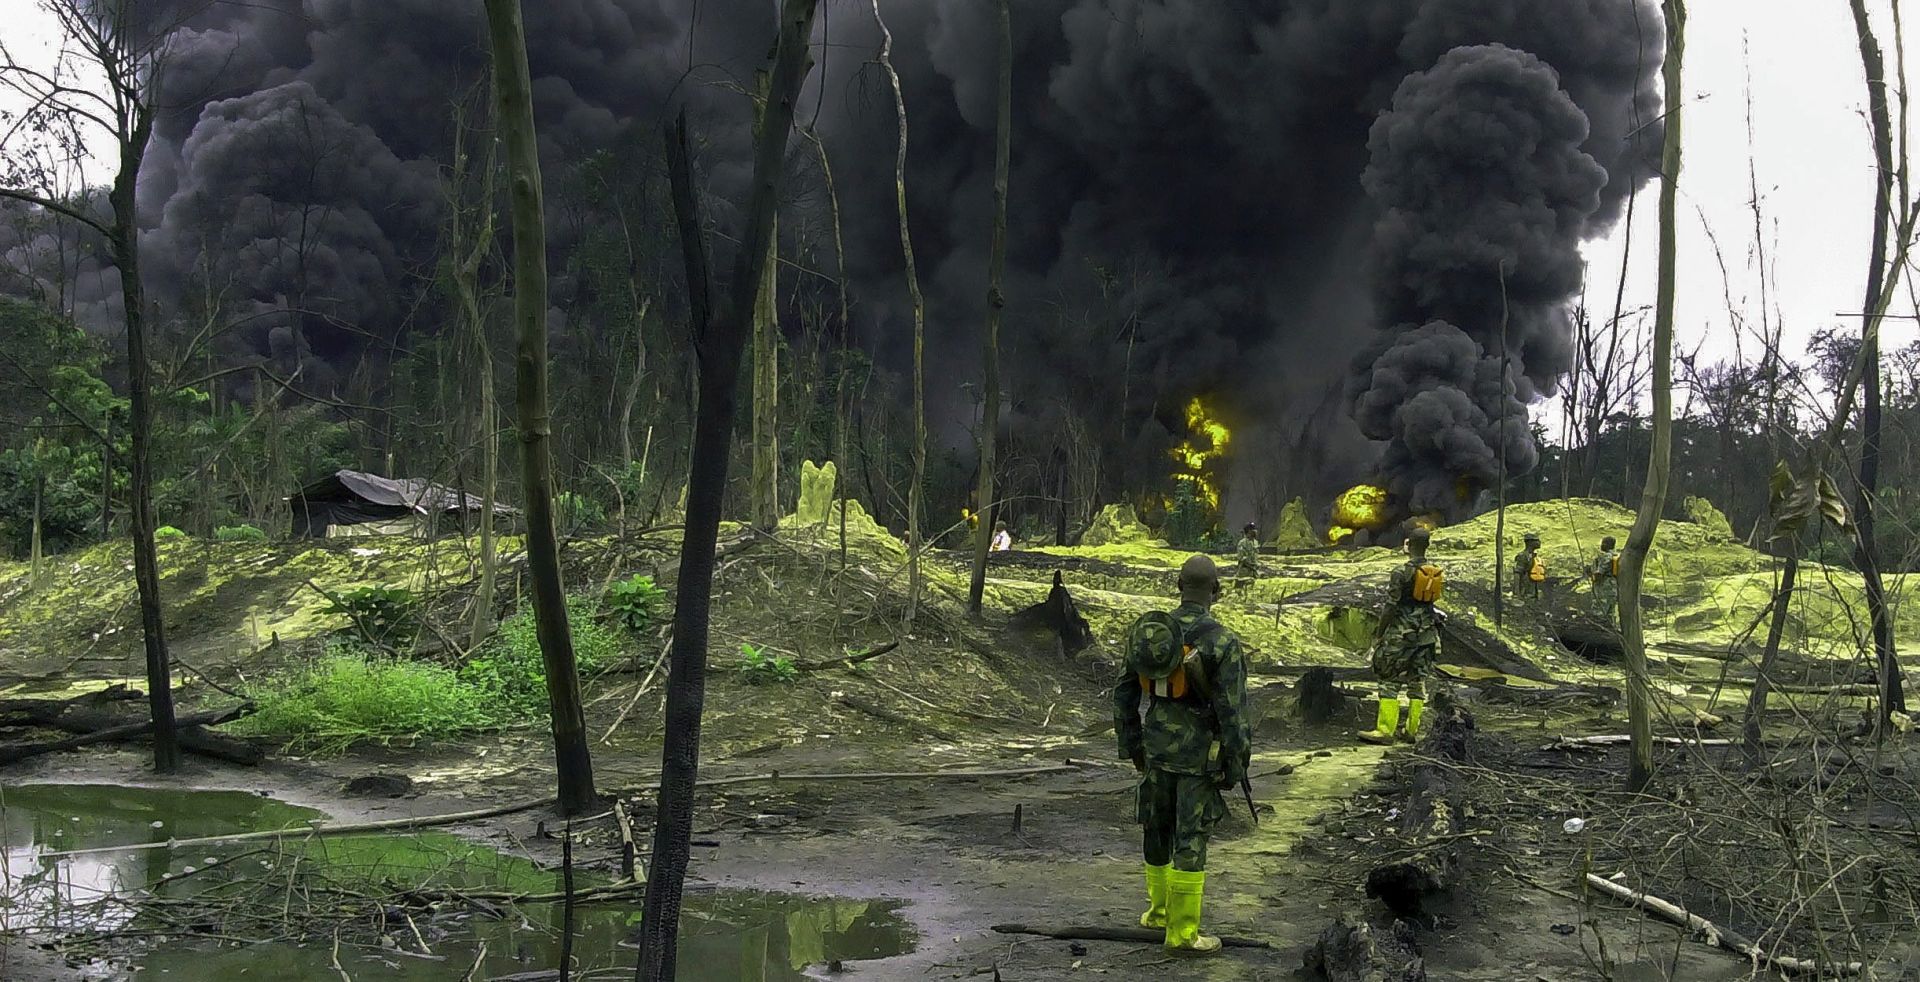 epa04805450 Nigerian soldiers of the Joint Task Force look on during the destruction of an illegal oil refinery in Oteghele Forest, Warri South-West Local Government Area of the Niger Delta, Southern Nigeria, 17 June 2015. According to Nigerian authorities, approximately 150,000 barrels of oil are stolen per day directly from the thousands of kilometres of pipelines across the oil rich delta states. It is estimated that 25 percent of this illegal oil tapped from the pipelines is then taken to illegal and makeshift oil refineries hidden in forests and amongst the mangroves of the Niger Delta. Nigeria is the largest crude oil producer in Africa.  EPA/STR